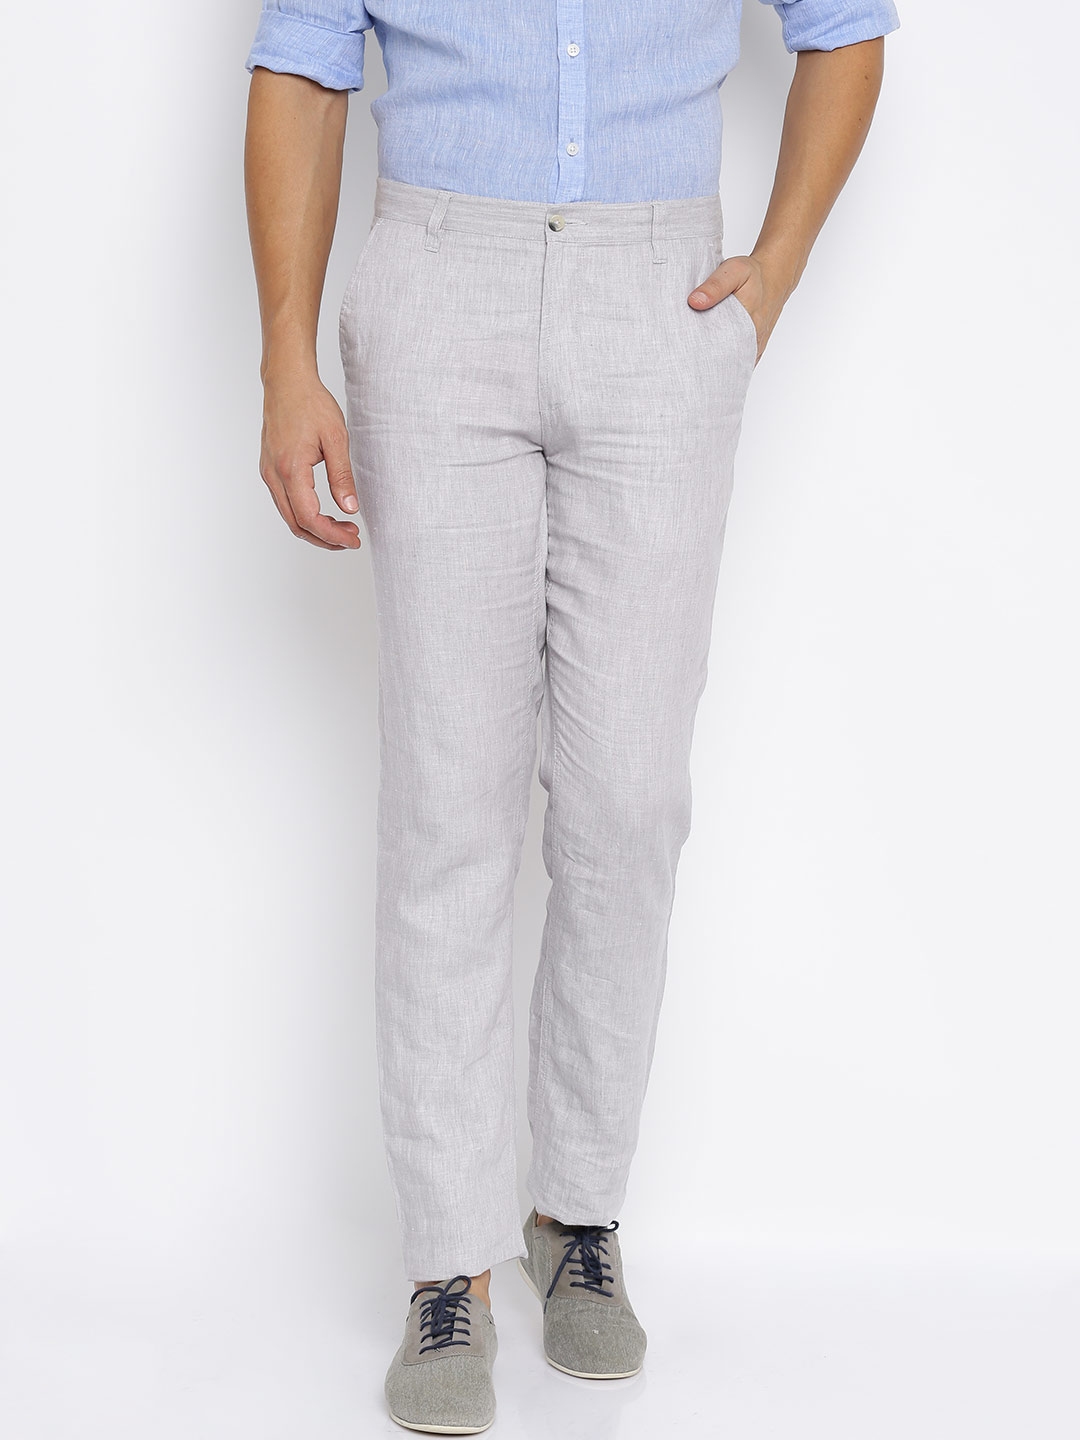 Buy Cream Cotton Solid Mens Formal Trousers online  Looksgudin